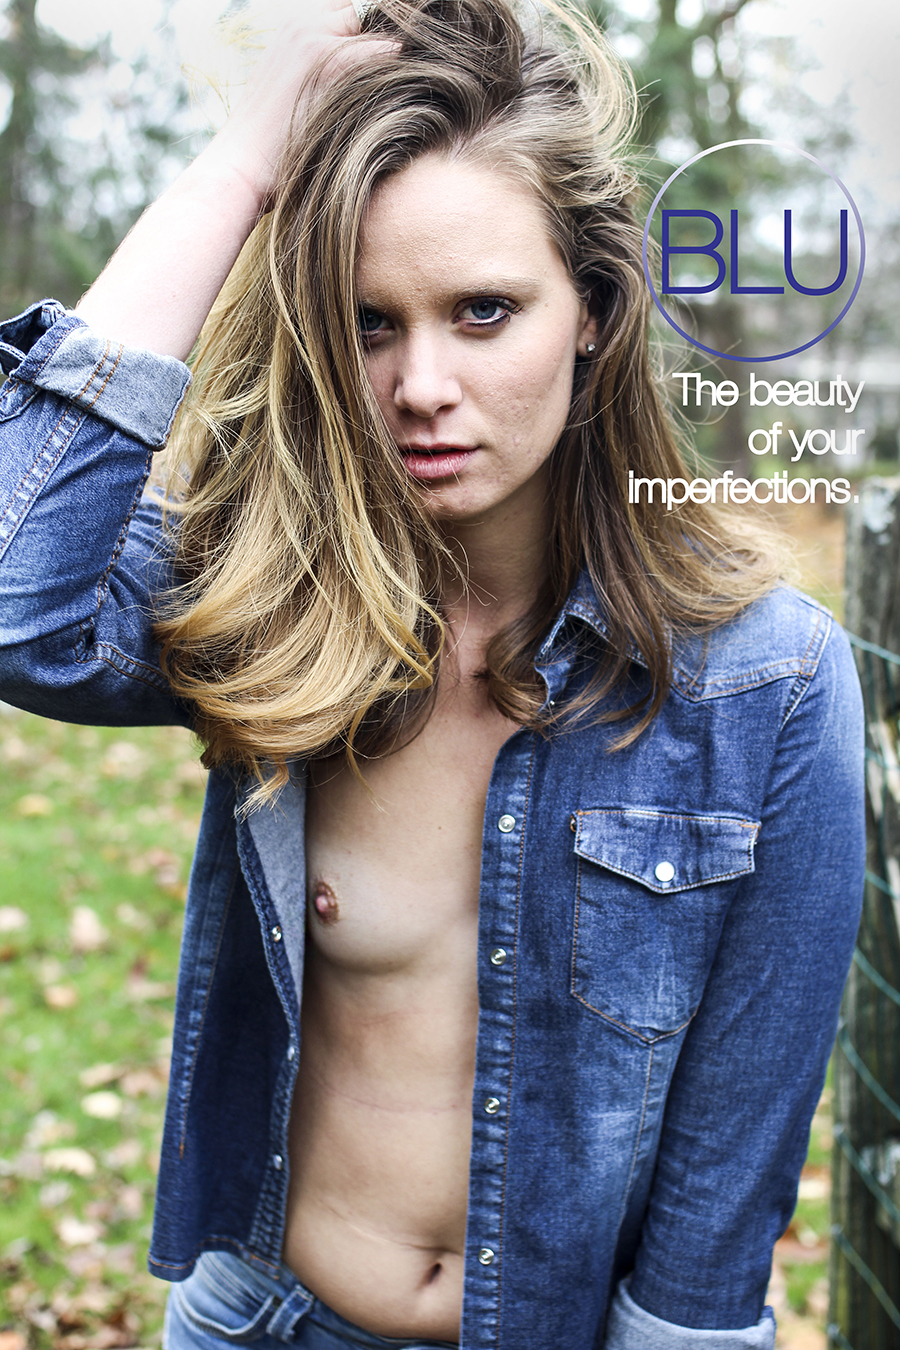 denim concept ad with bare natural breast no retouching